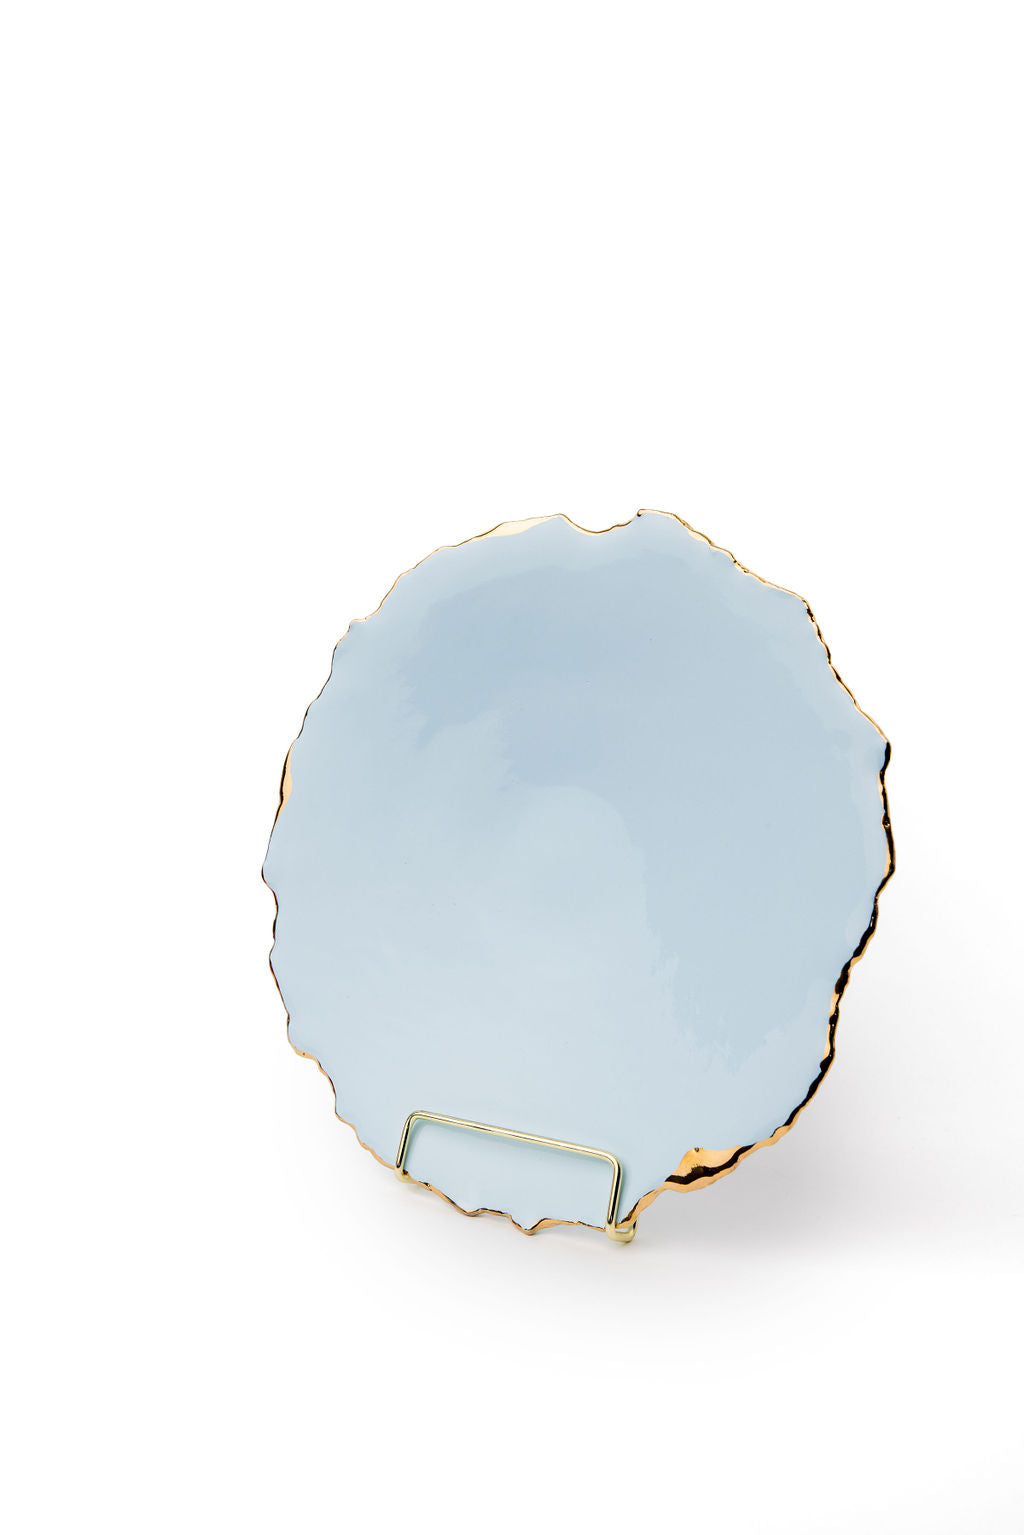 large plate gold edge baby blue